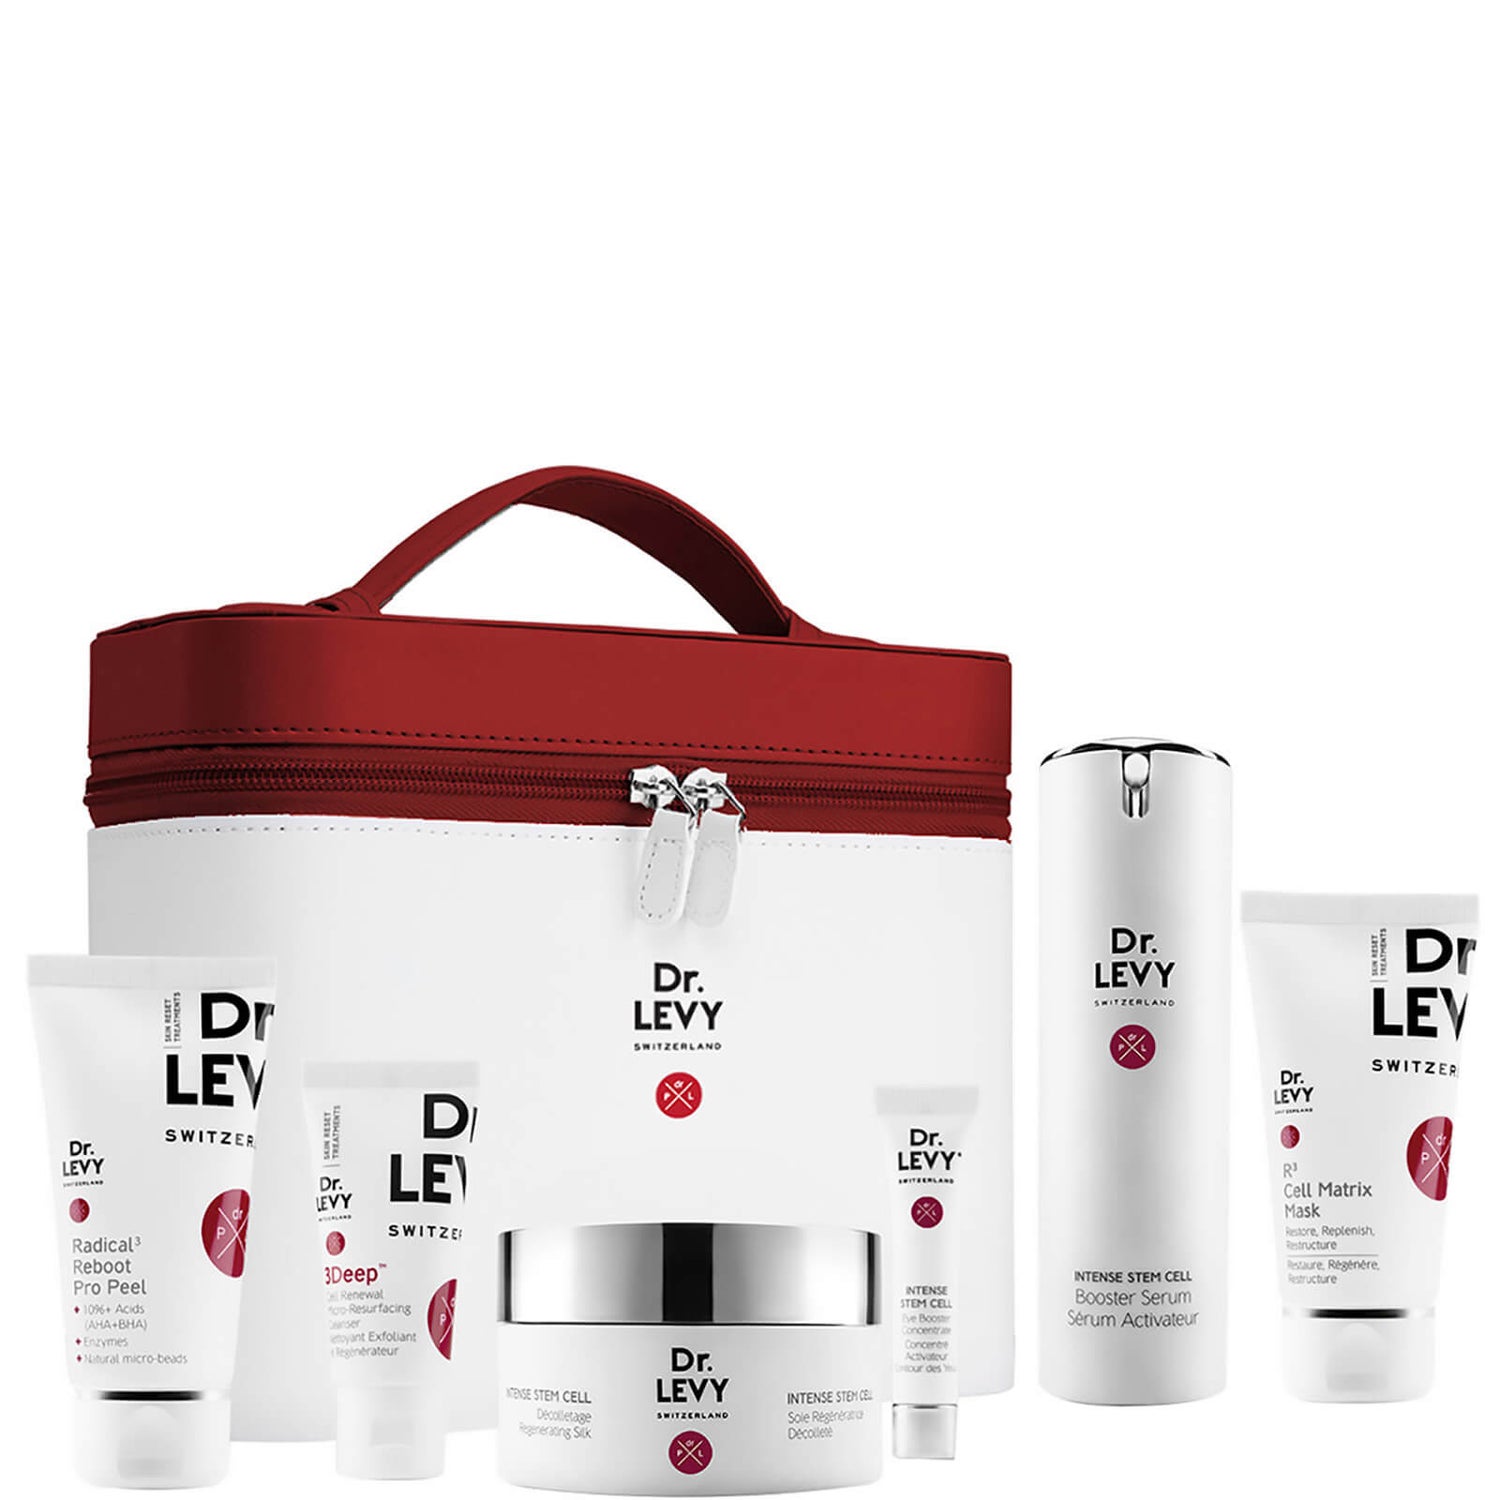 Dr. LEVY Switzerland The Ultimate Stem Cell Spring Homecure